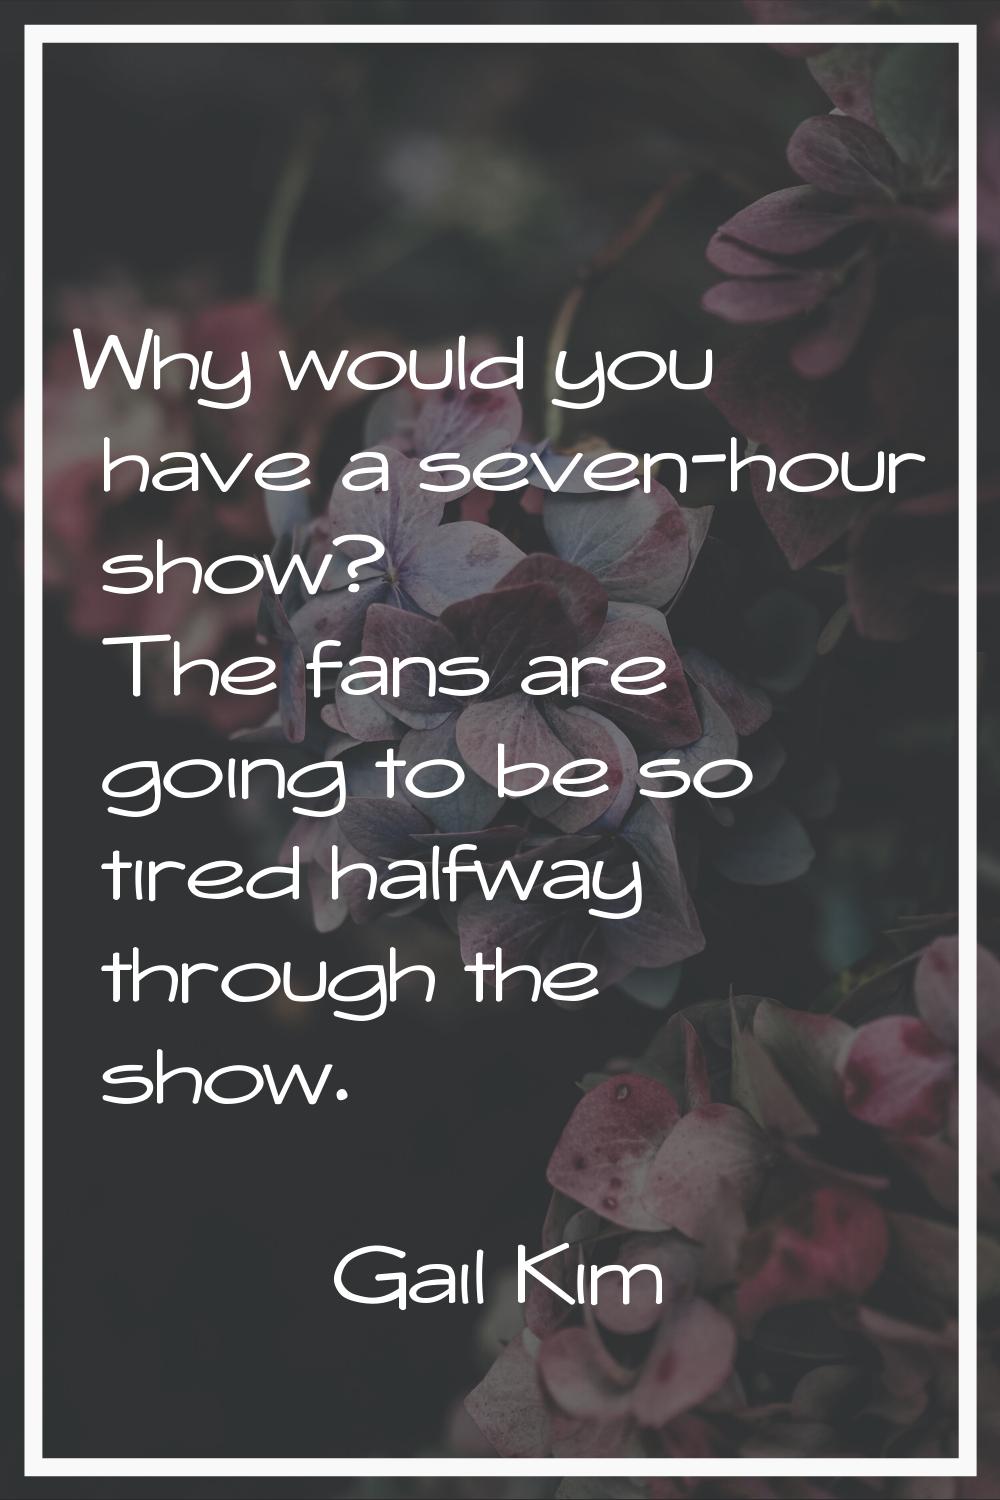 Why would you have a seven-hour show? The fans are going to be so tired halfway through the show.